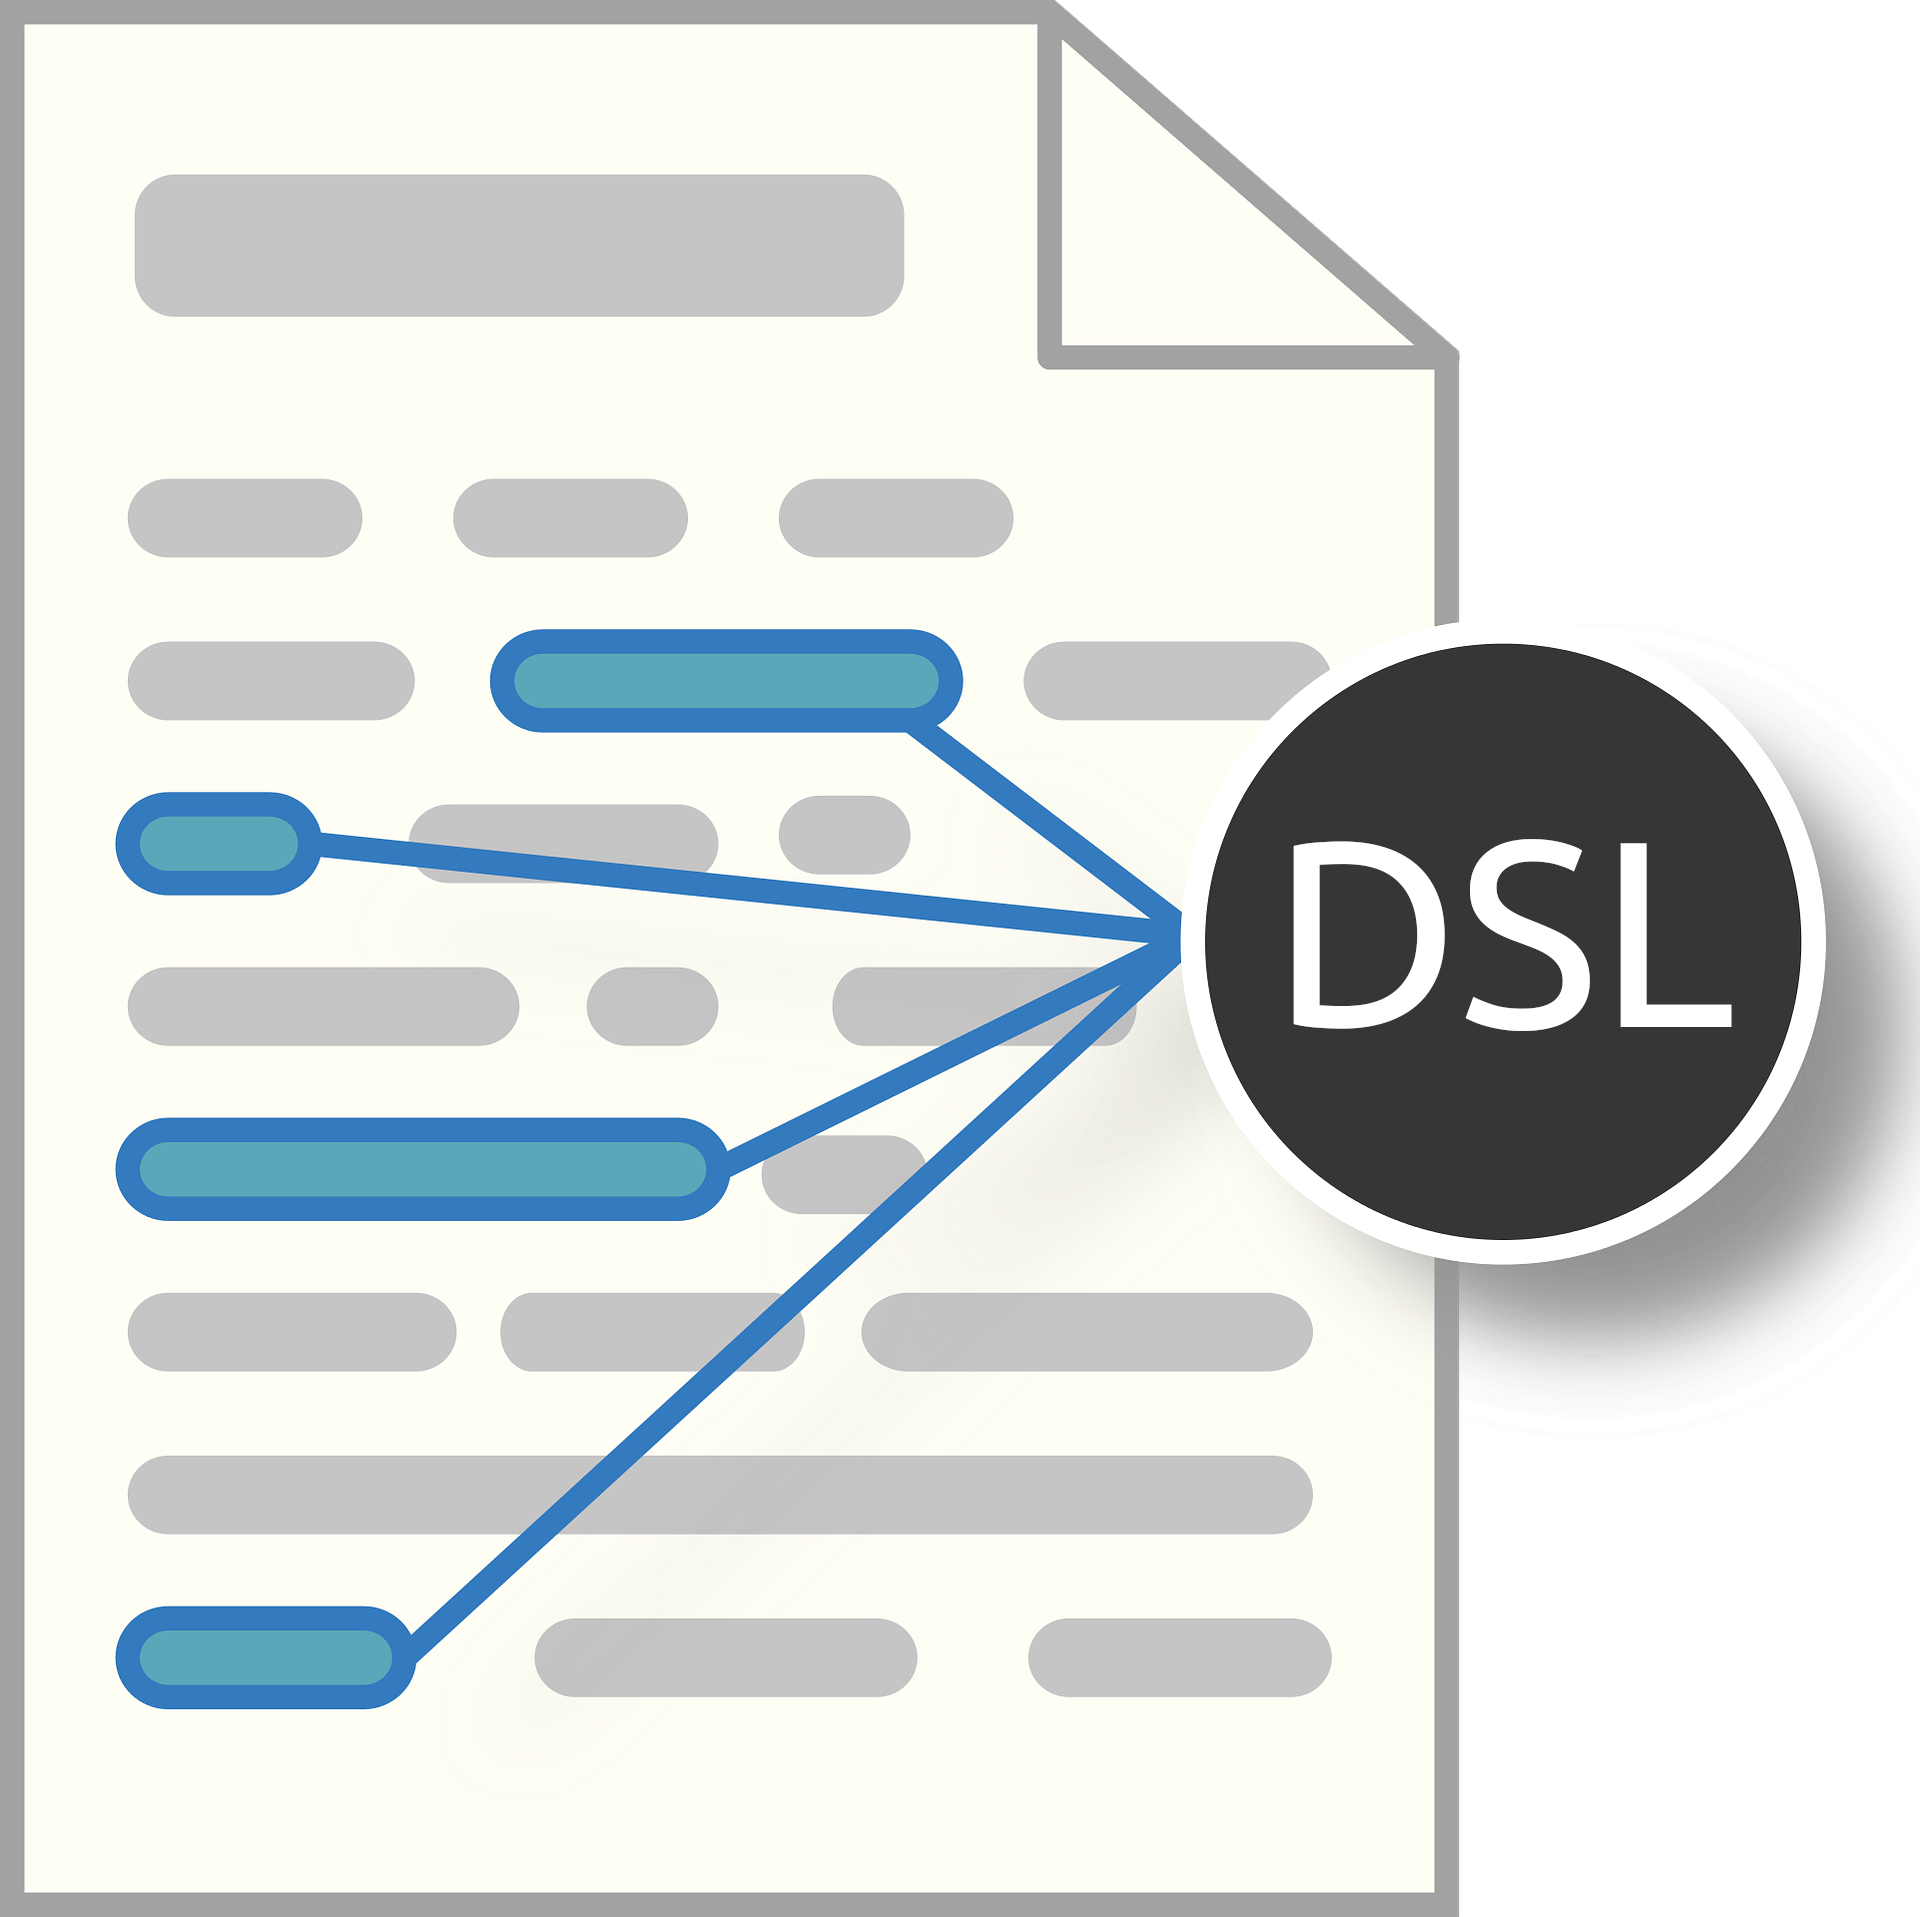 Towards the Optical Character Recognition of DSLs